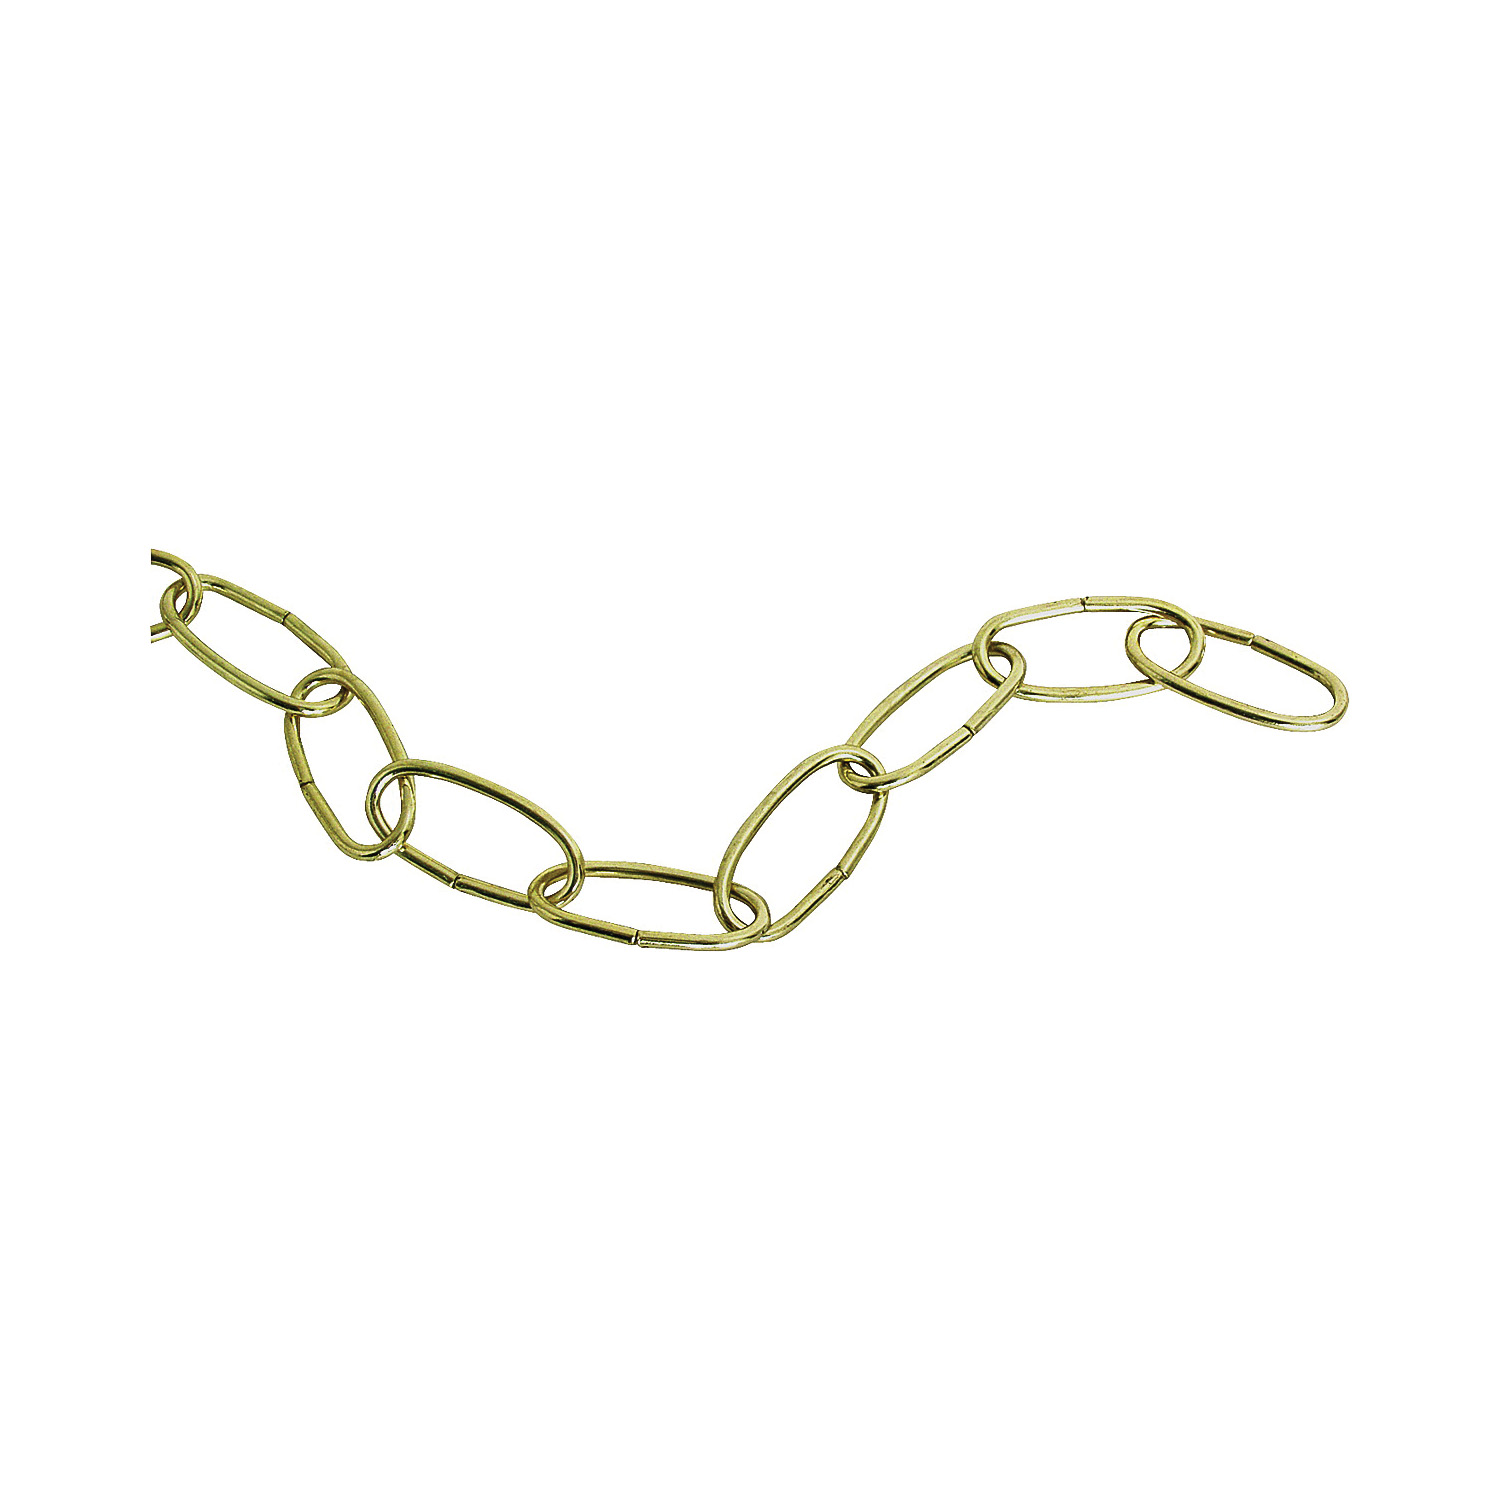 Landscapers Select GB0013L Plant Extender Chain, 36 in L, Steel, Brass, Ceiling Mount Mounting